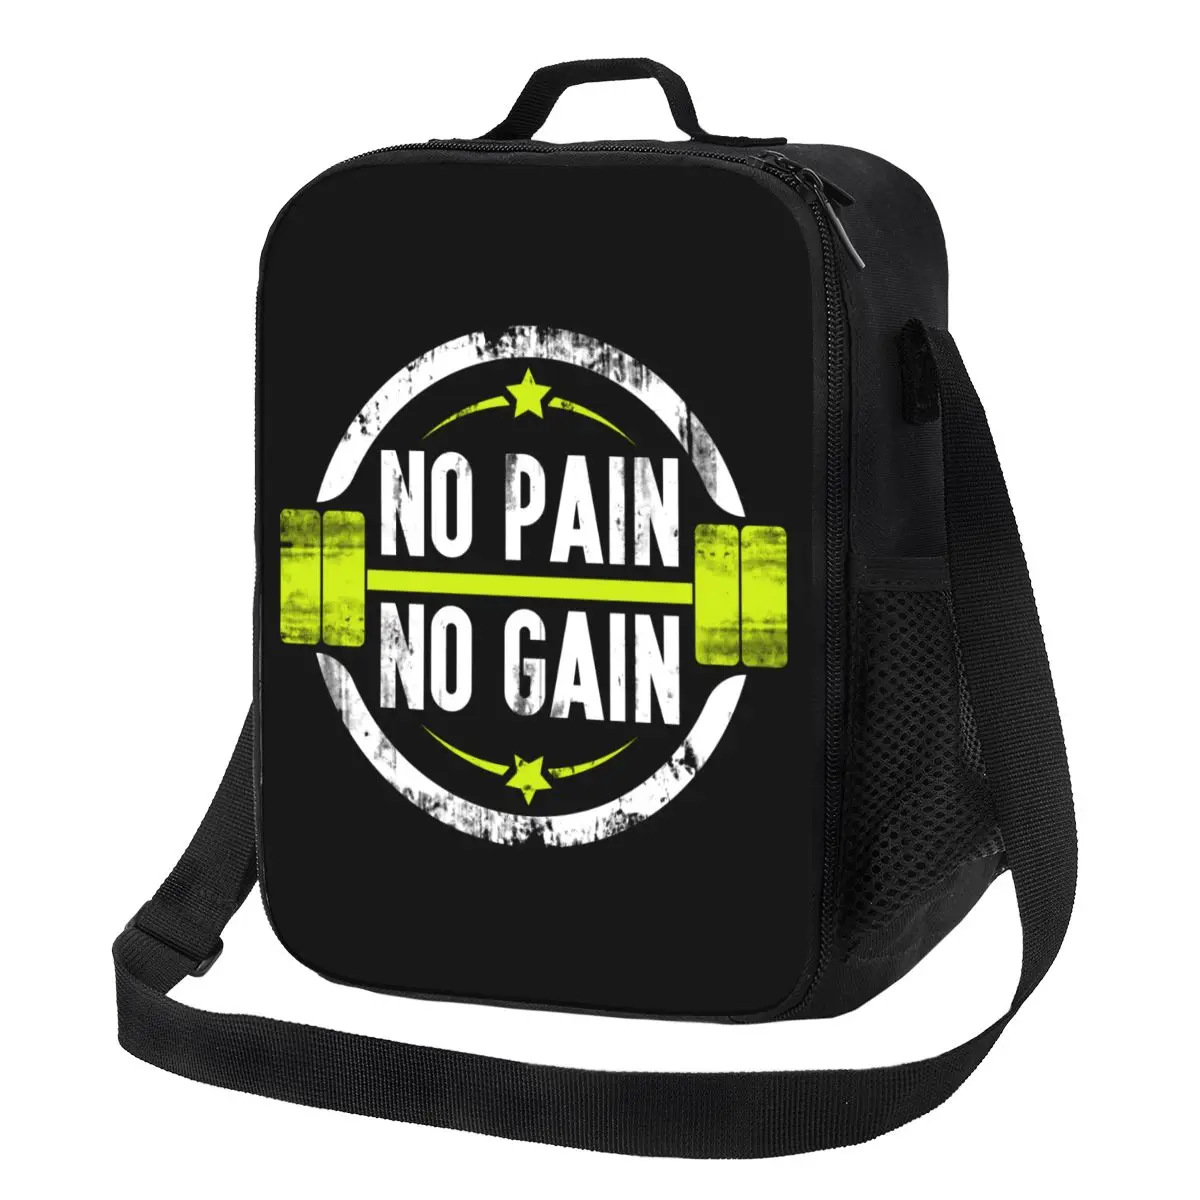 

No Pain No Gain Insulated Lunch Tote Bag for Women Bodybuilding Fitness Gym Portable Thermal Cooler Food Bento Box School